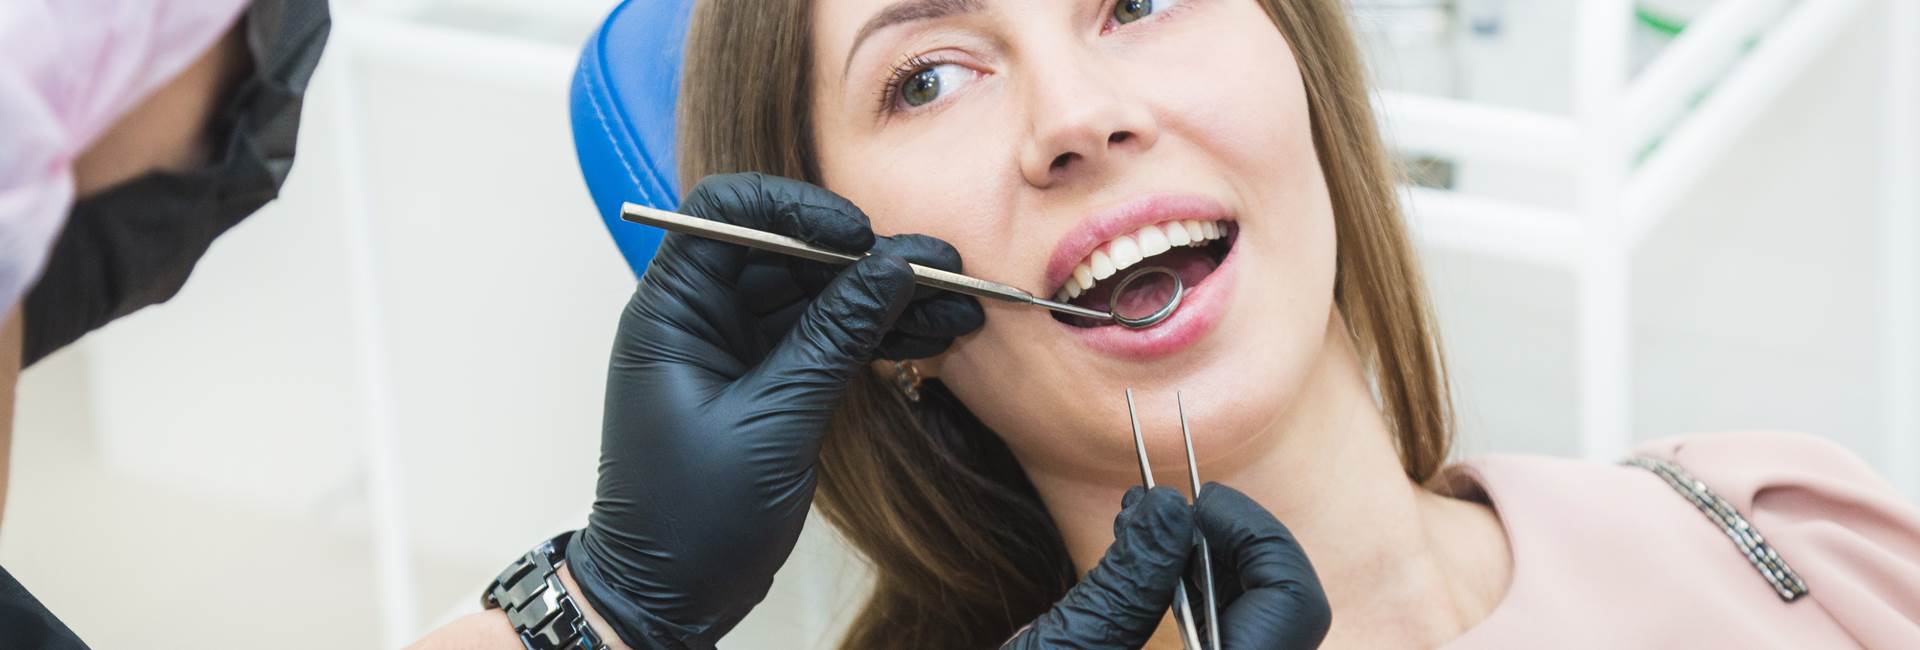 Beautiful woman smiling after Extractions